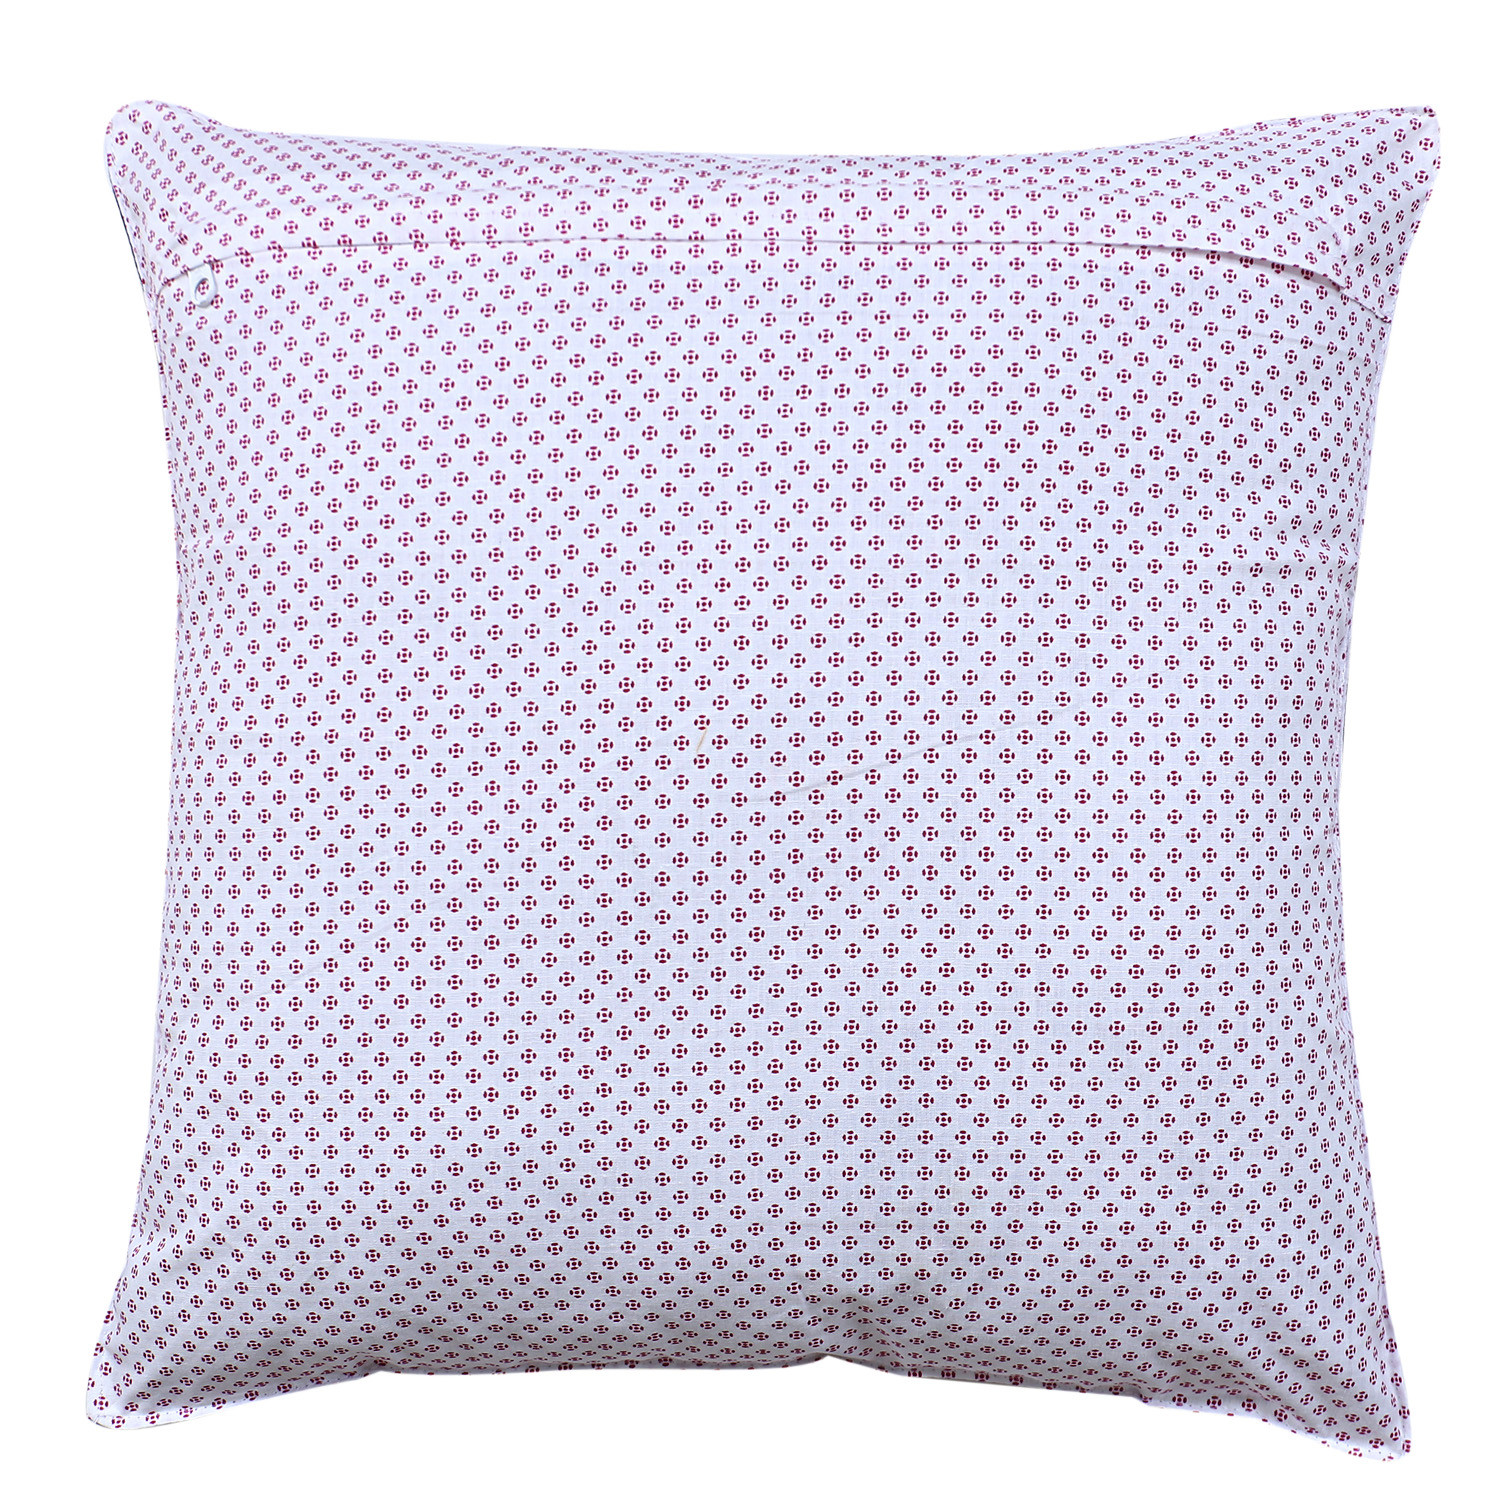 Kuber Industries Cushion Cover|Ractangle Cushion Covers|Sofa Cushion Covers|Cushion Covers 16 inch x 16 inch|Cushion Cover Set of 5| (Pink)